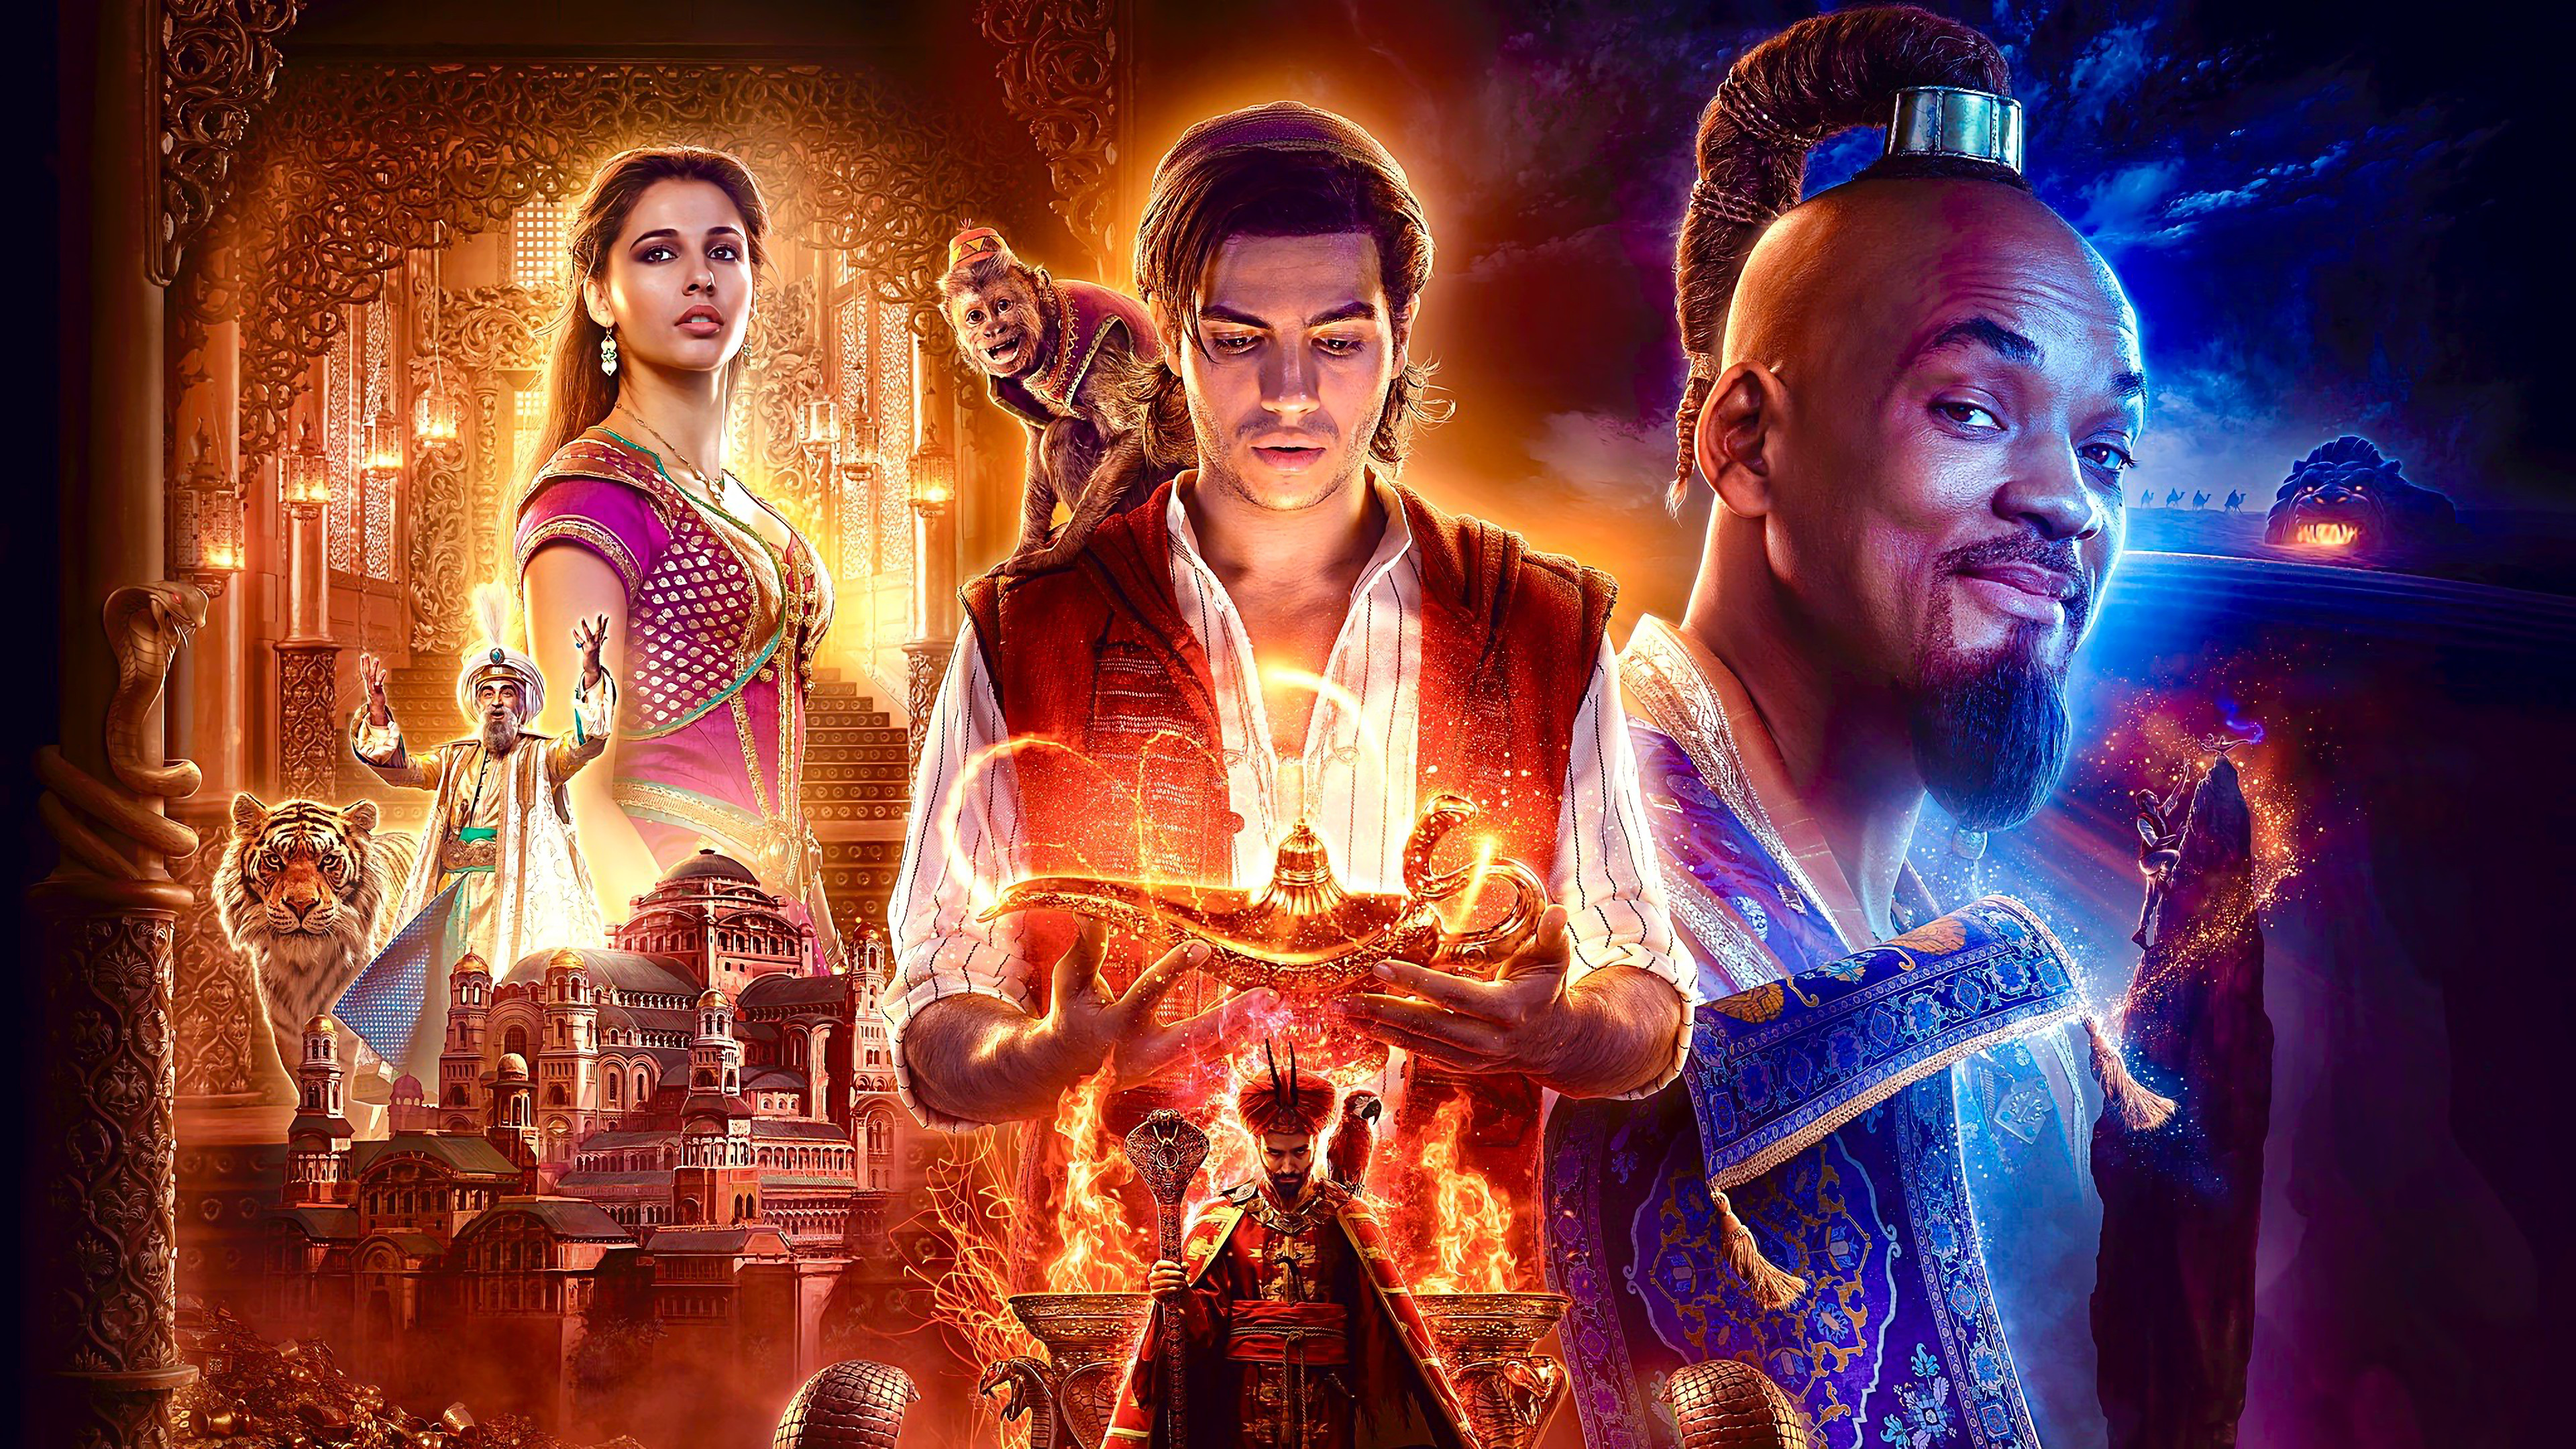 Guy Ritchie movies, Aladdin movie characters, Vibrant wallpapers, 3840x2160 4K Desktop